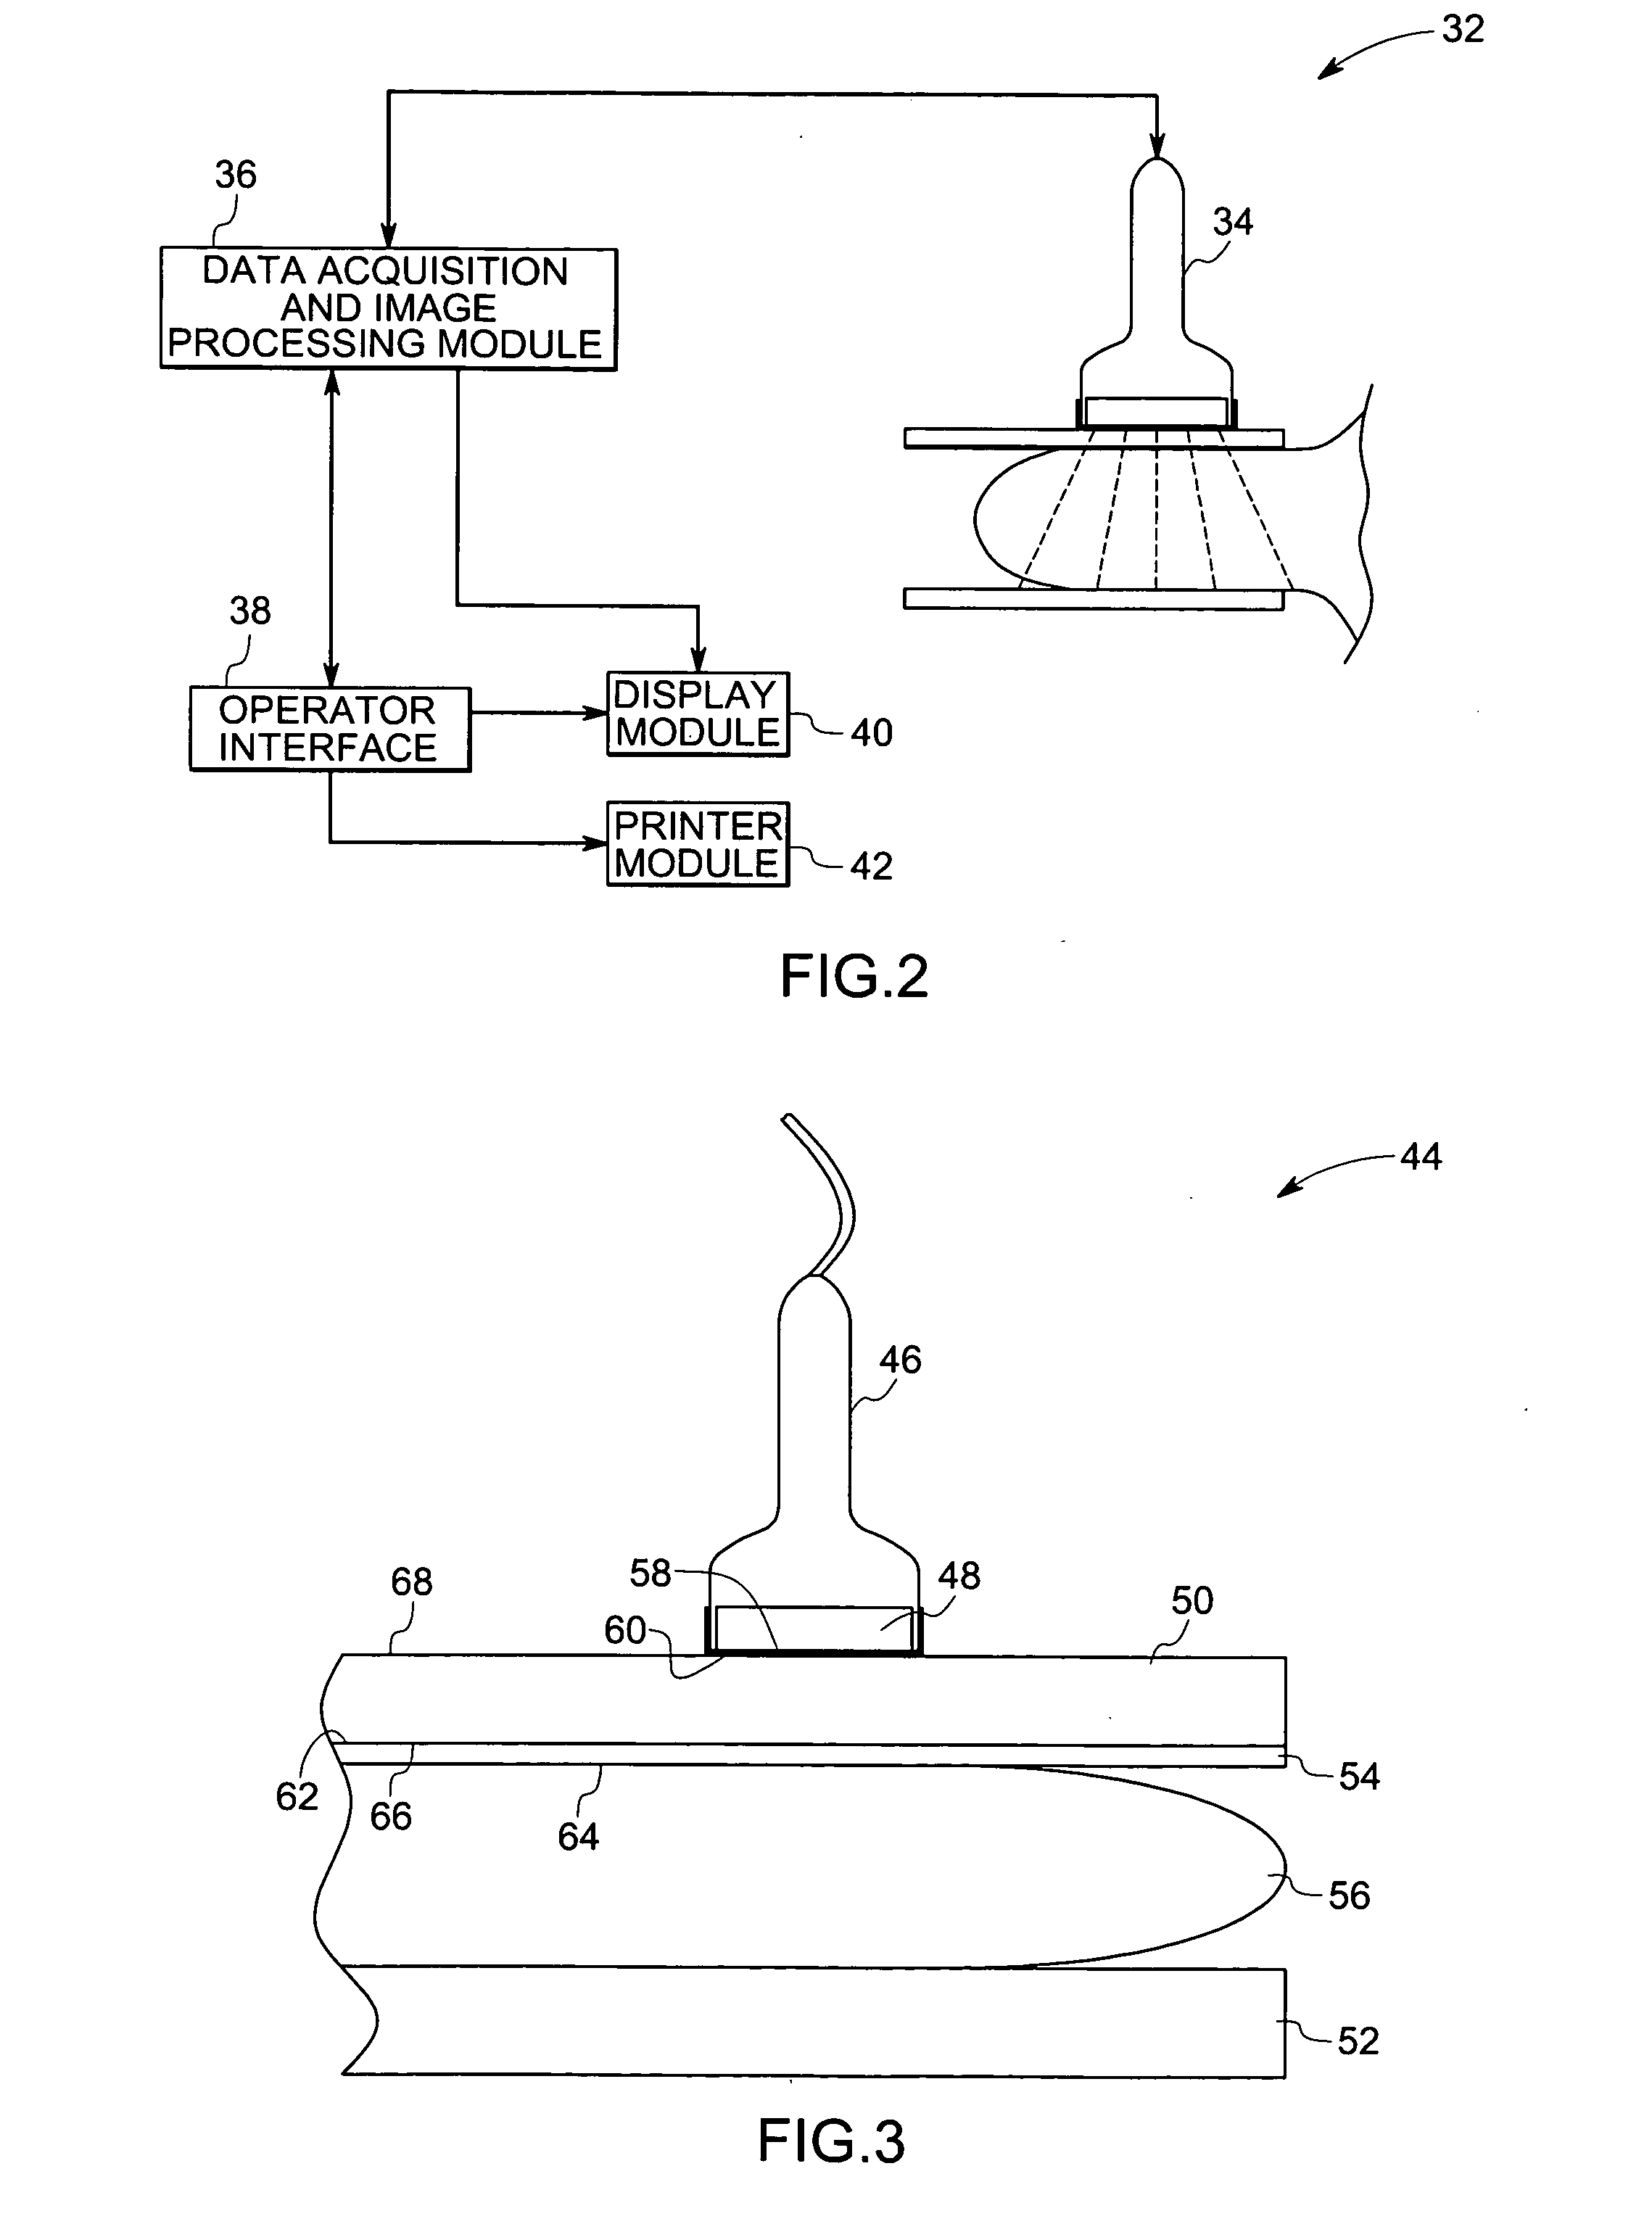 Acoustic coupling gel for combined mammography and ultrasound image acquisition and methods thereof